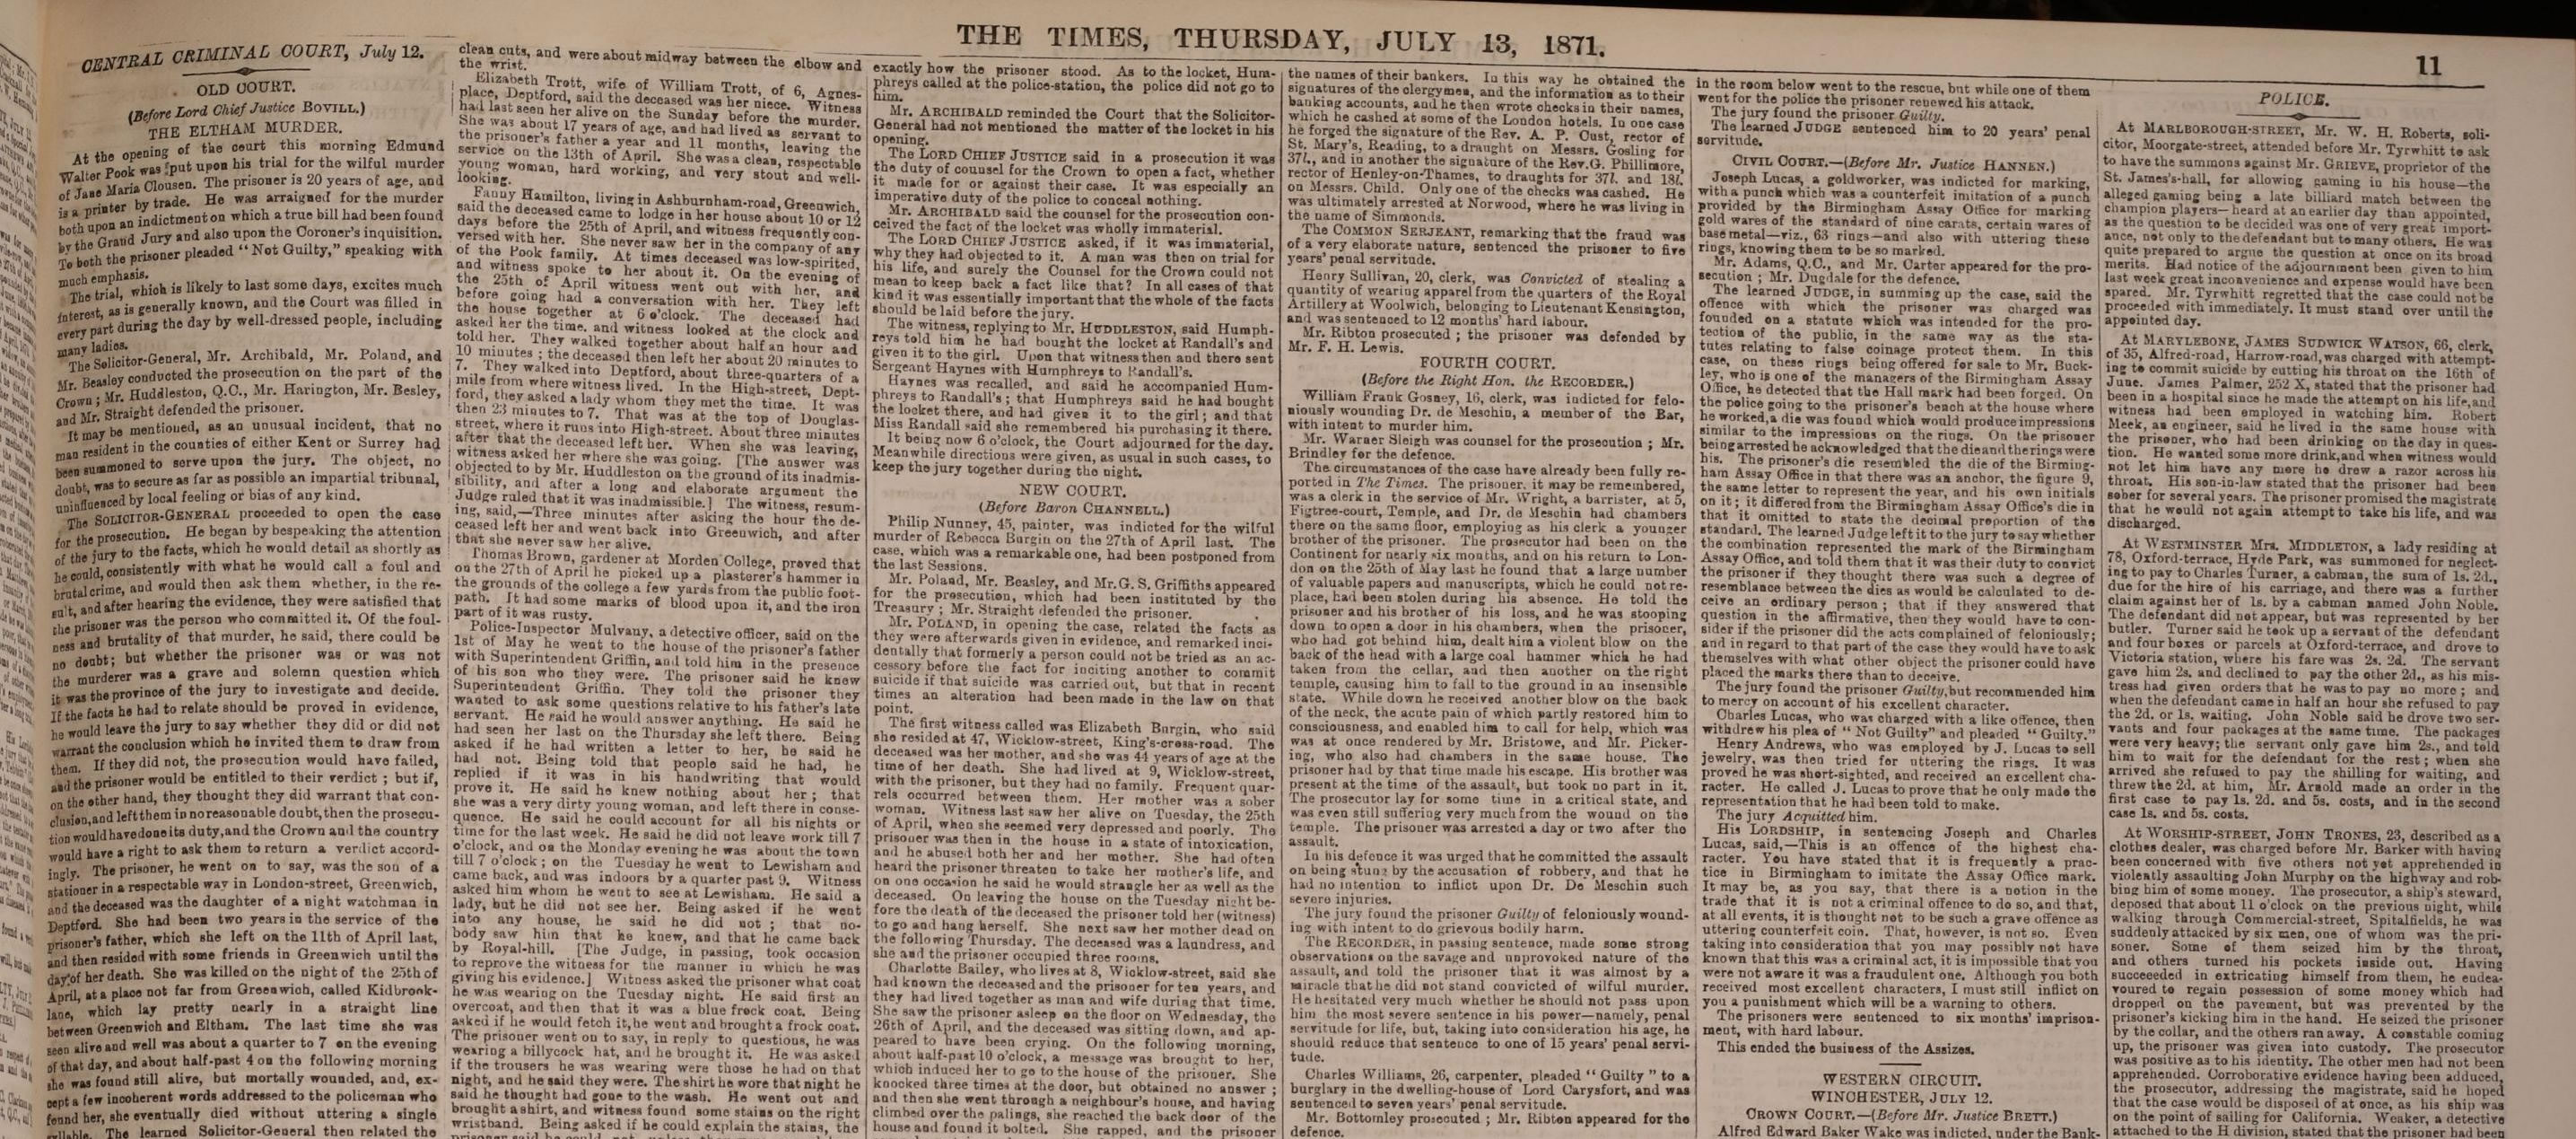 The Times July 13th 1871 in the Newspaper and Magazines on TheGenealogist